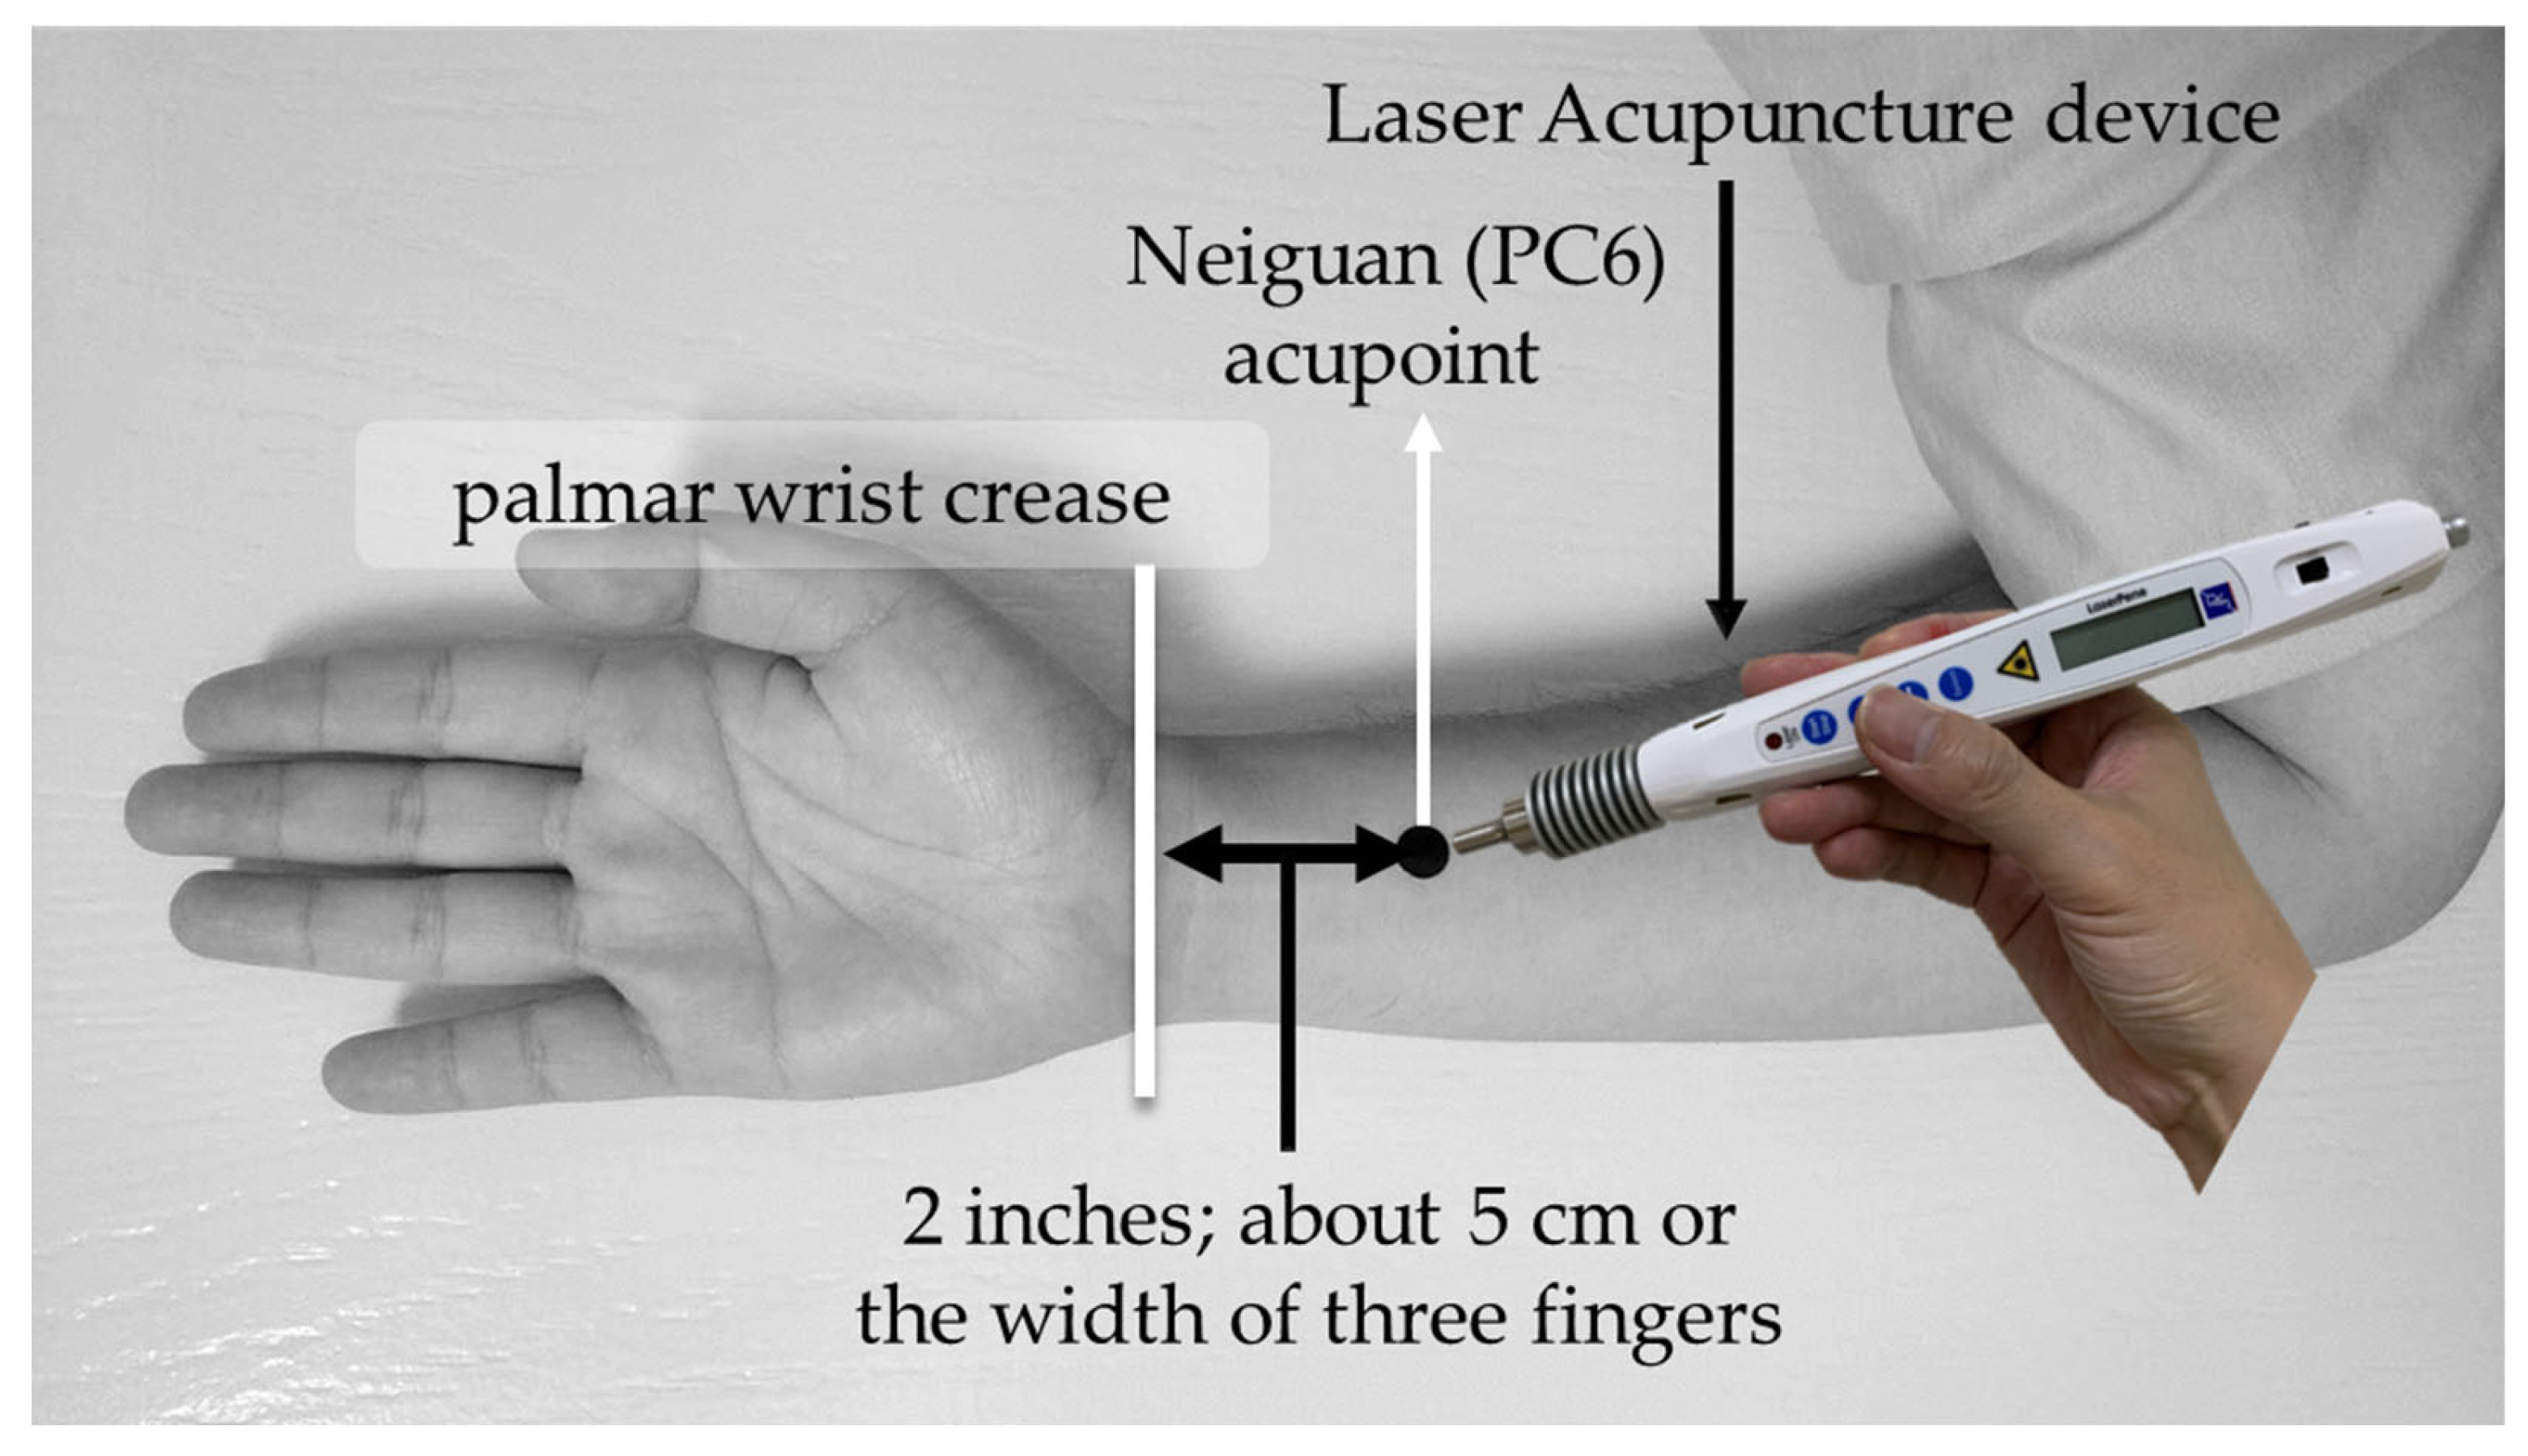 The electrical acupuncture stimulator used in the study (paper I).